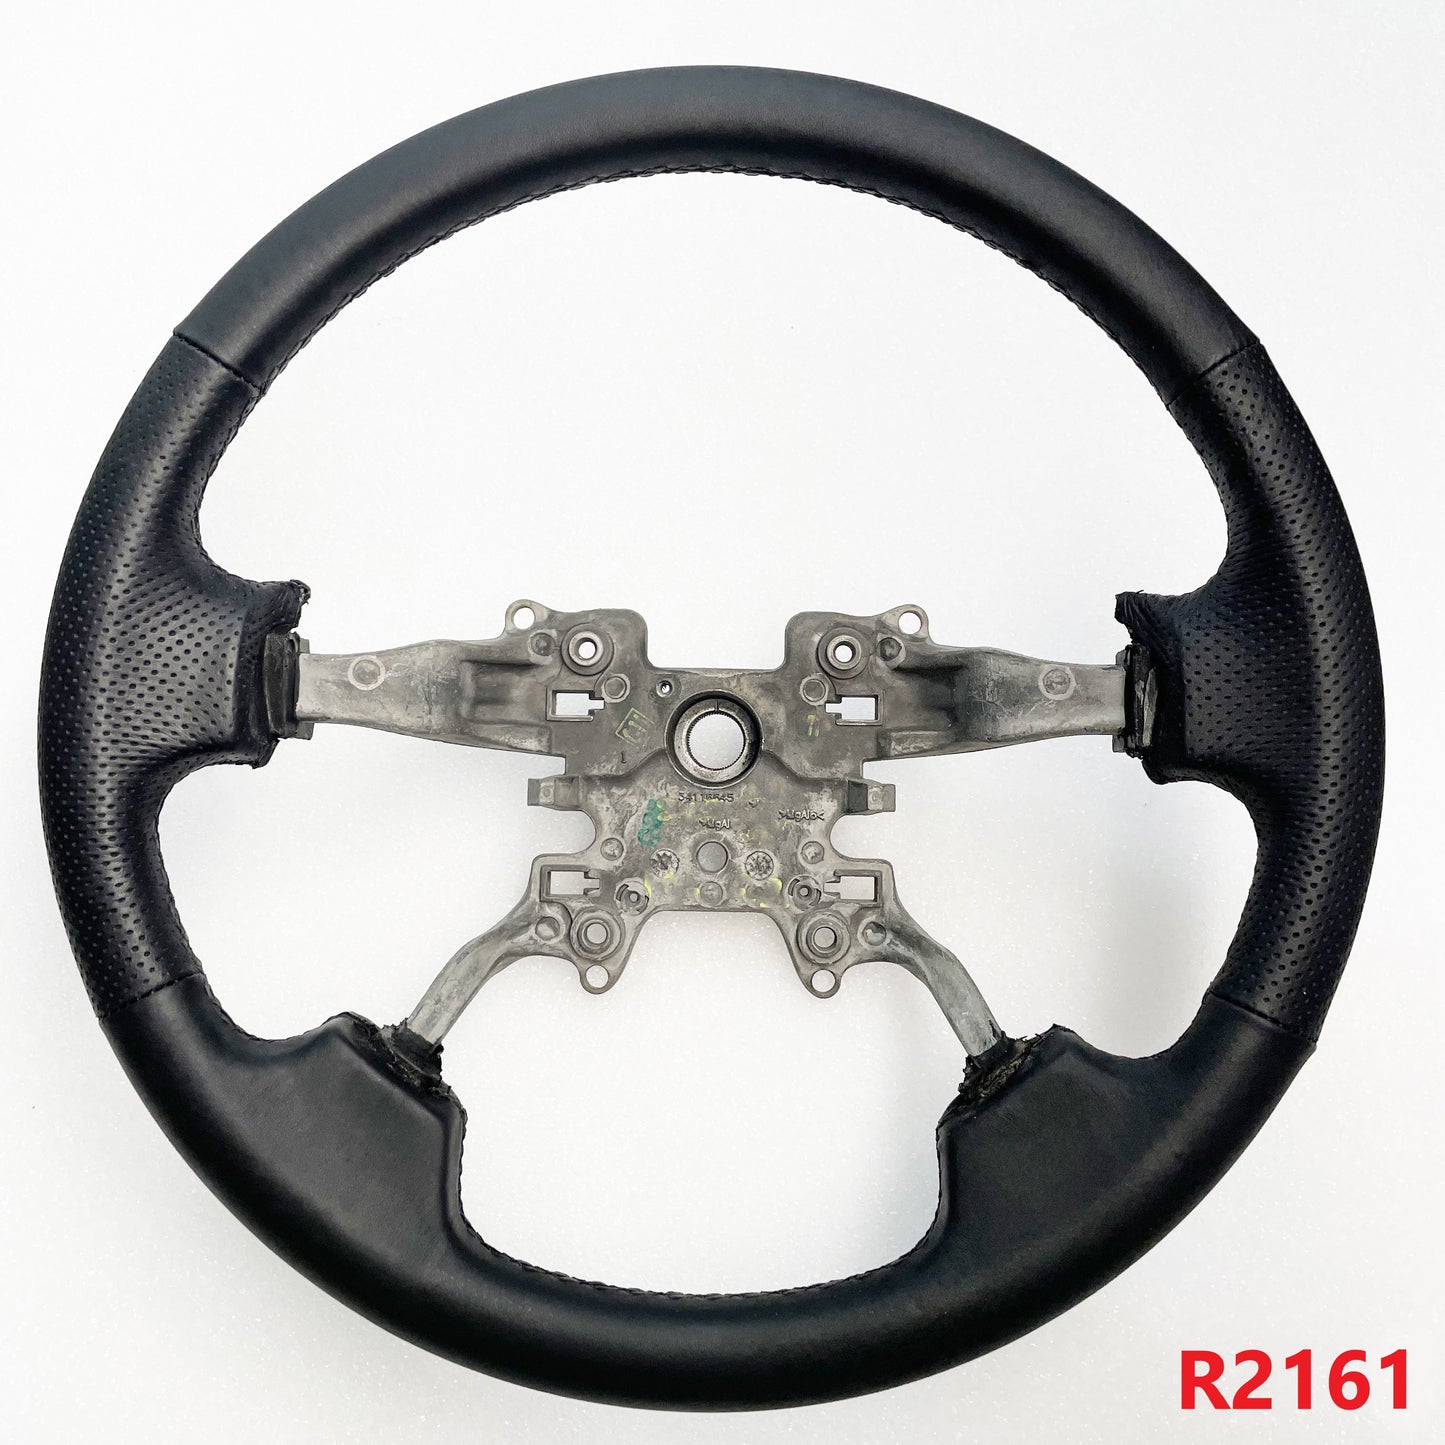 Clearance - Retrimmed Steering Wheel - Black Napa Leather / Perforated for Range Rover Sport 2010 / Discovery 4 - Quality Grade B